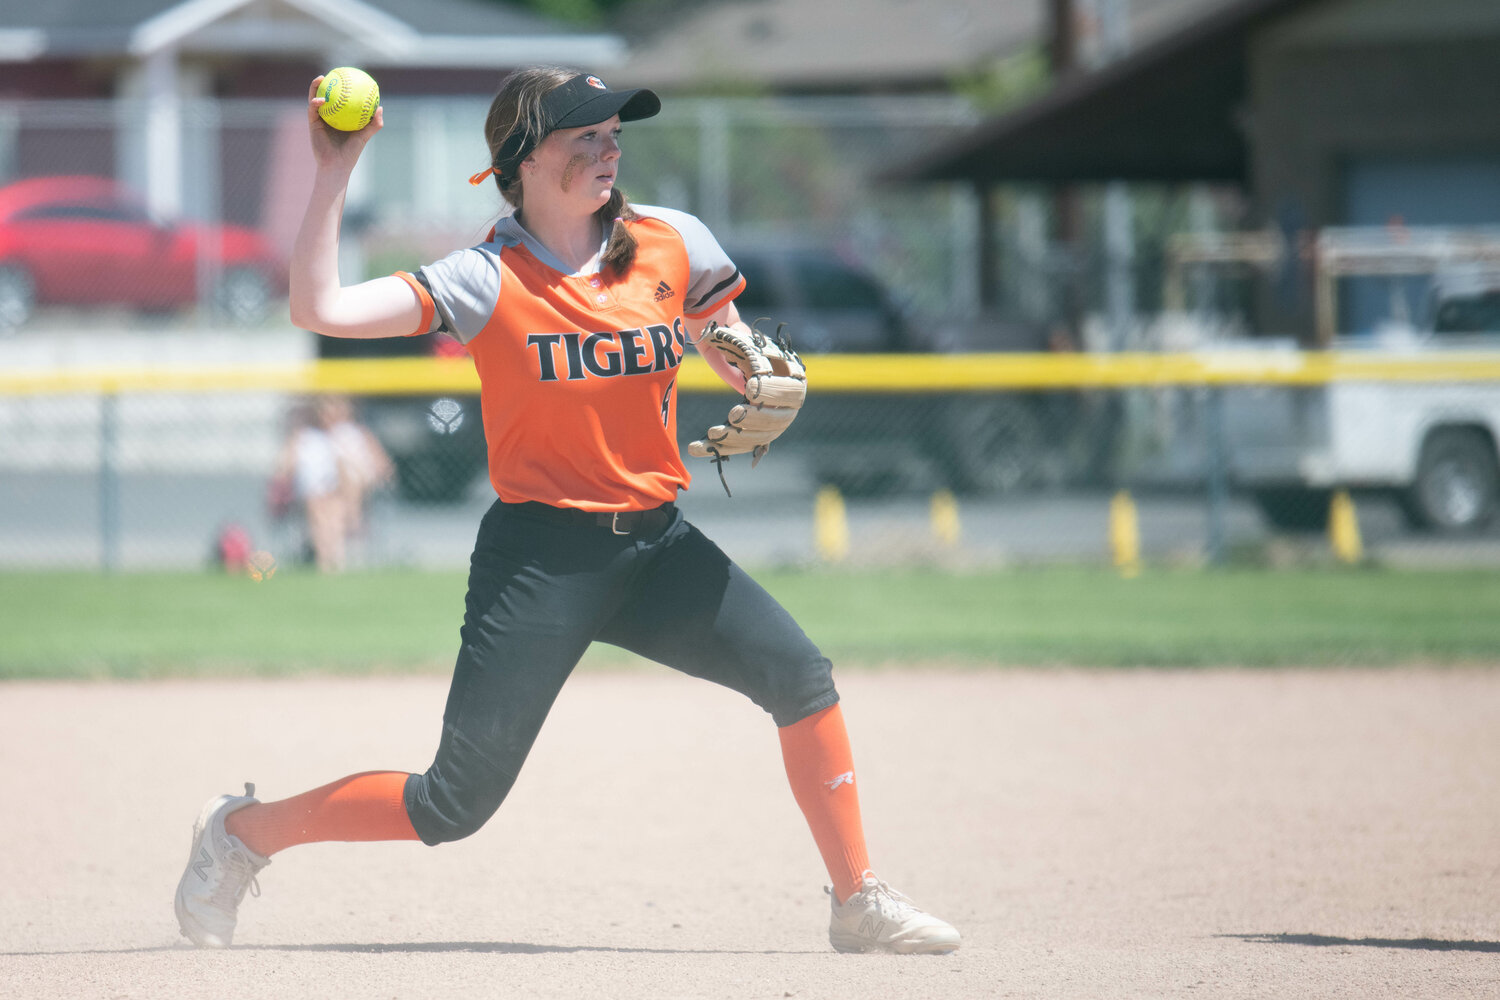 Gracie Schofield throws to first during Centralia's 5-4 loss to Lynden in the first round of the 2A state tournament, May 26 in Selah.